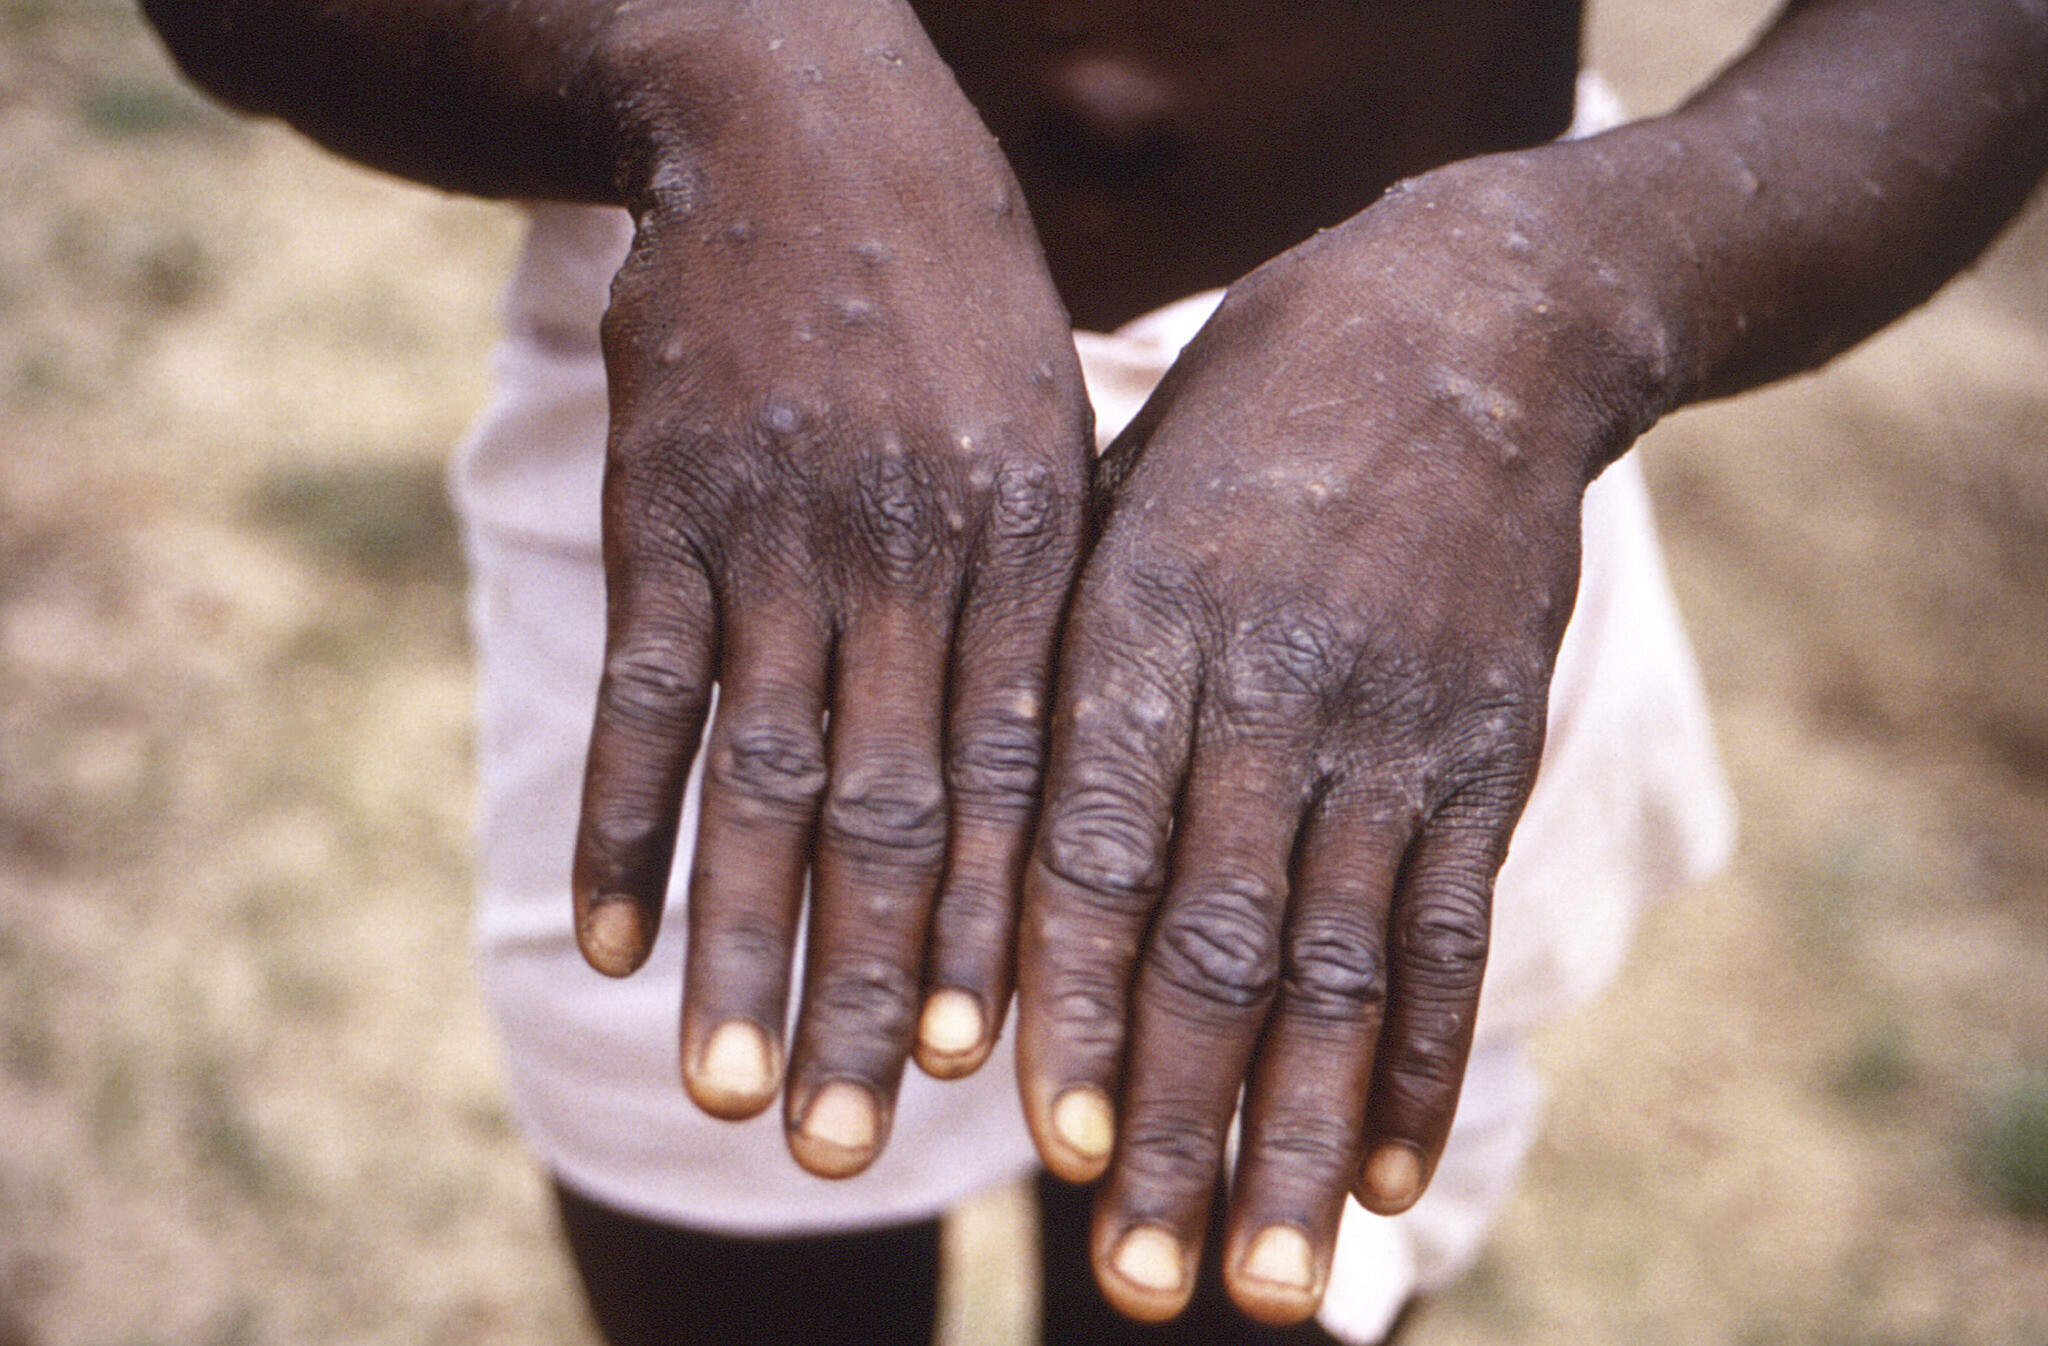 This 1997 image provided by the CDC during an investigation into an outbreak of monkeypox, which took place in the Democratic Republic of the Congo (DRC), formerly Zaire, and depicts the dorsal surfaces of the hands of a monkeypox case patient, who was displaying the appearance of the characteristic rash during its recuperative stage. (CDC via AP)